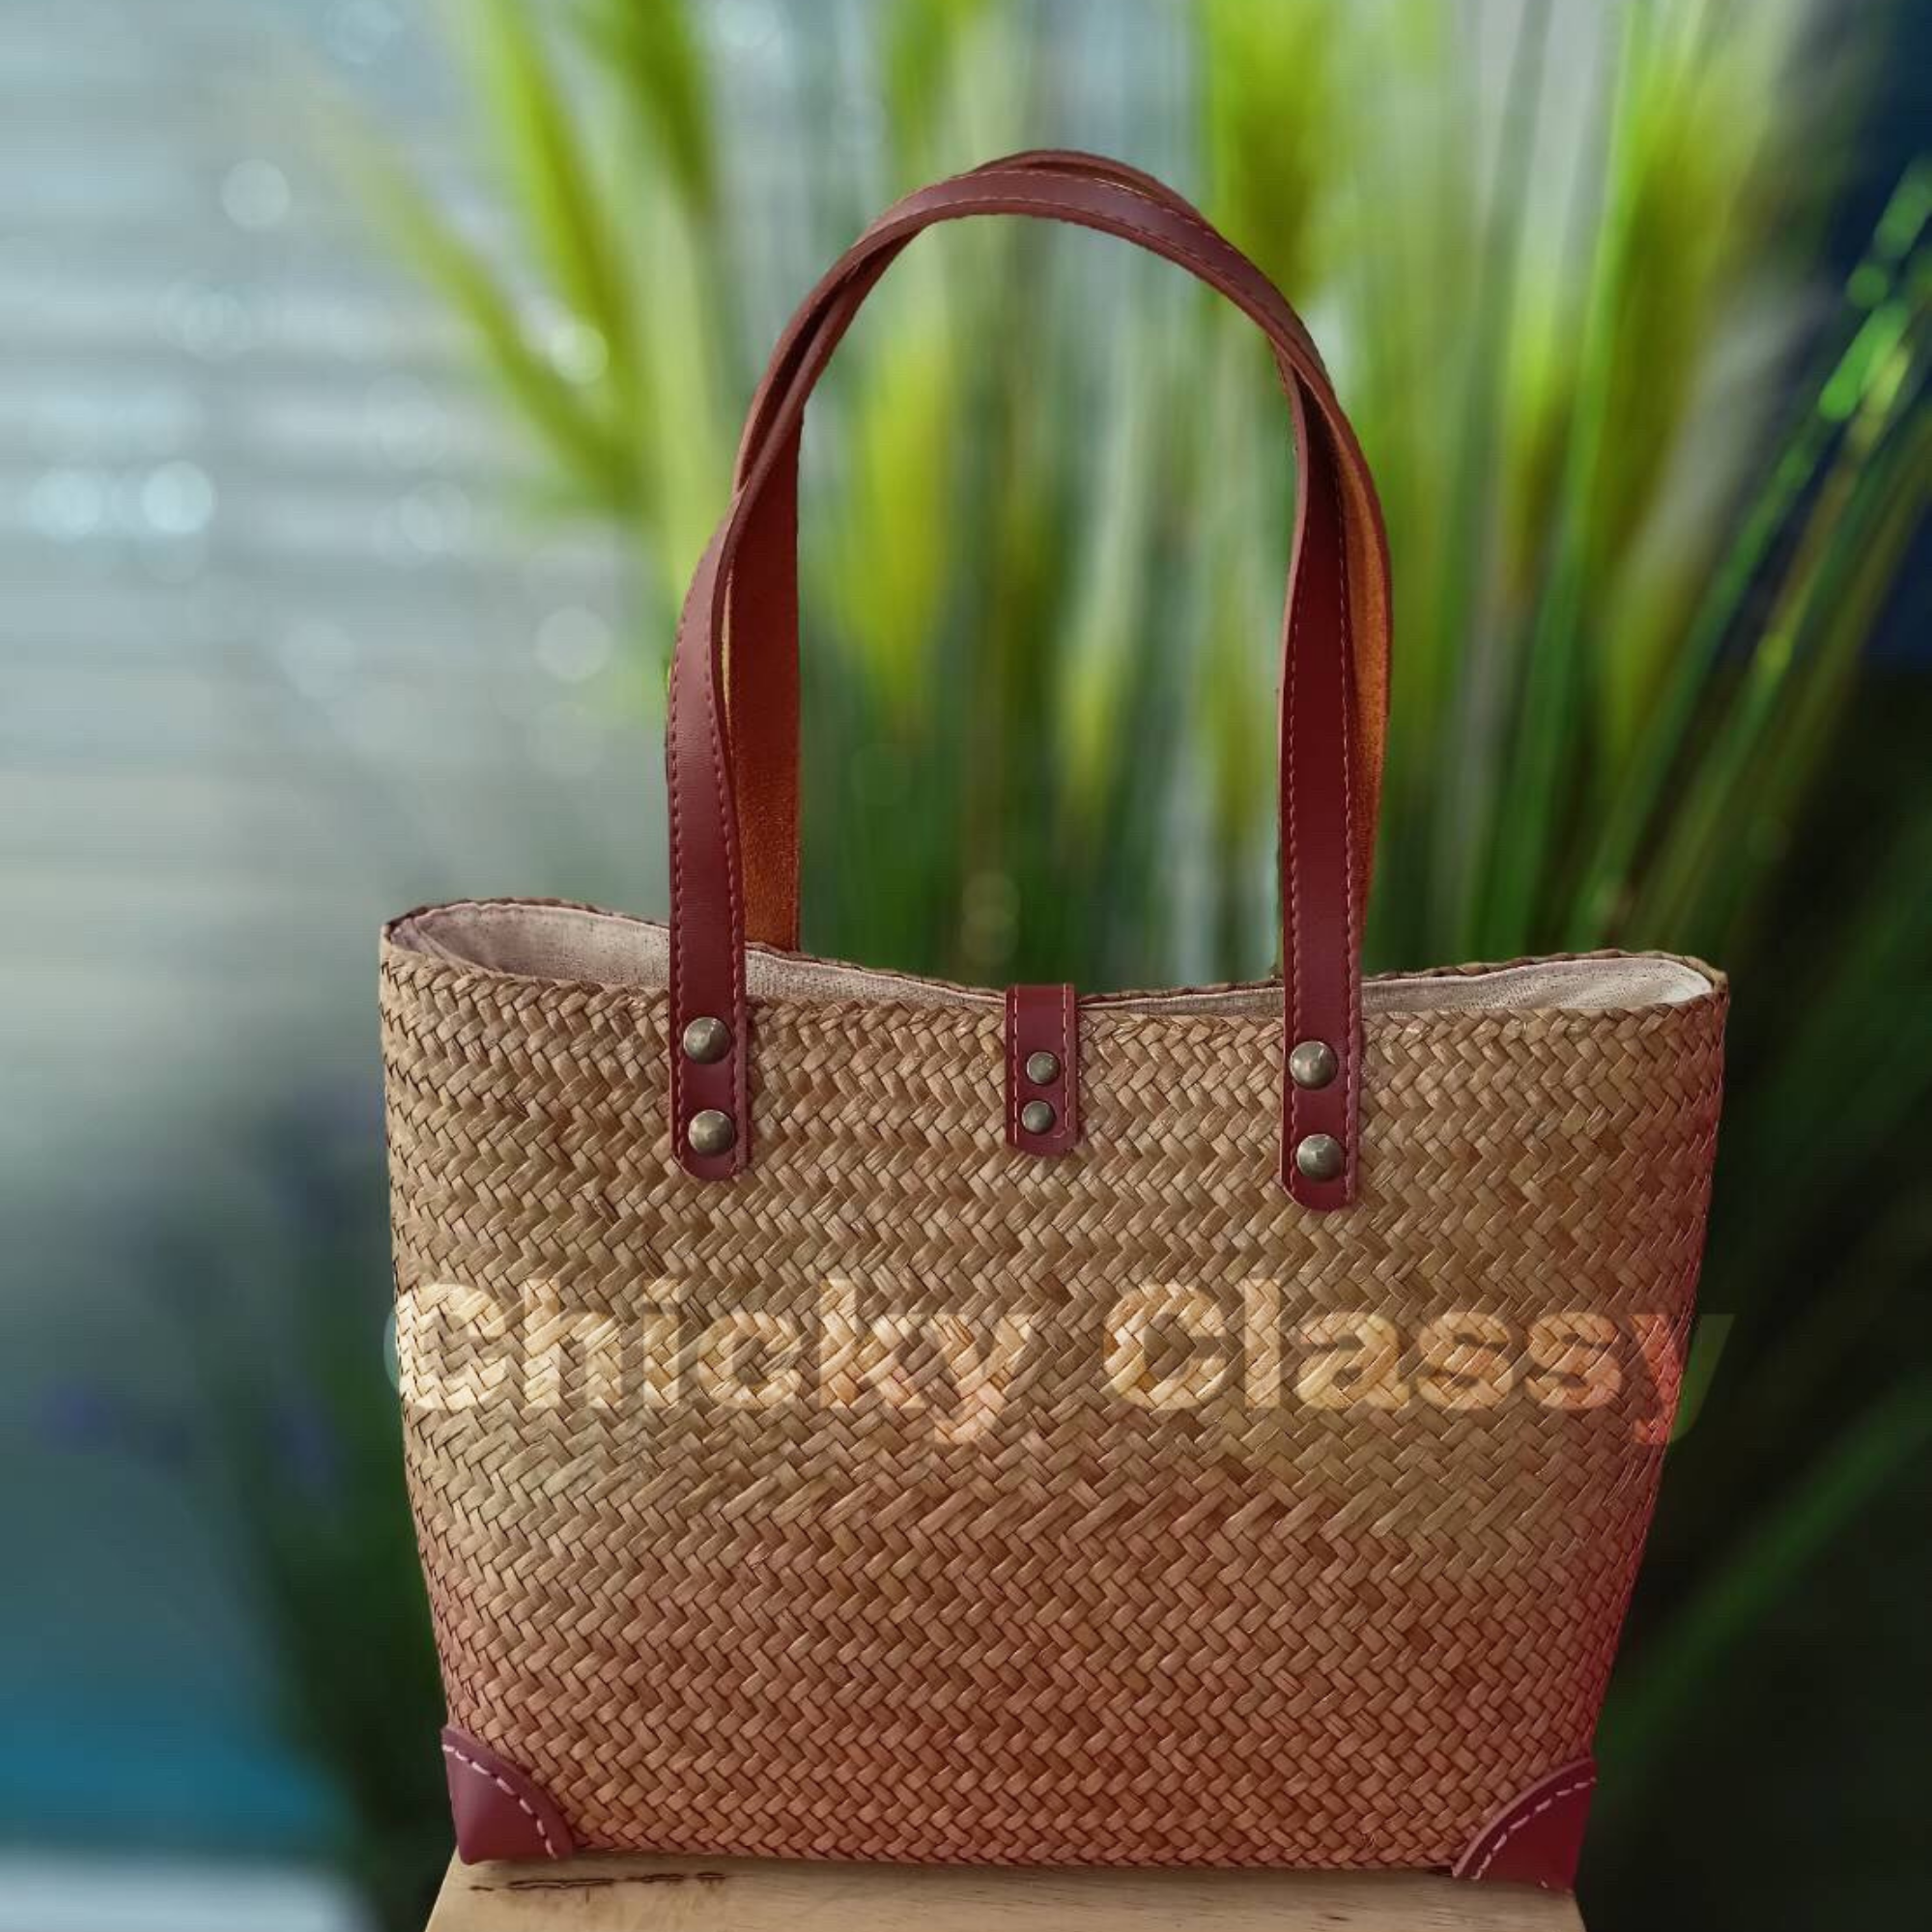 Chicky Classy Home made Classic bag